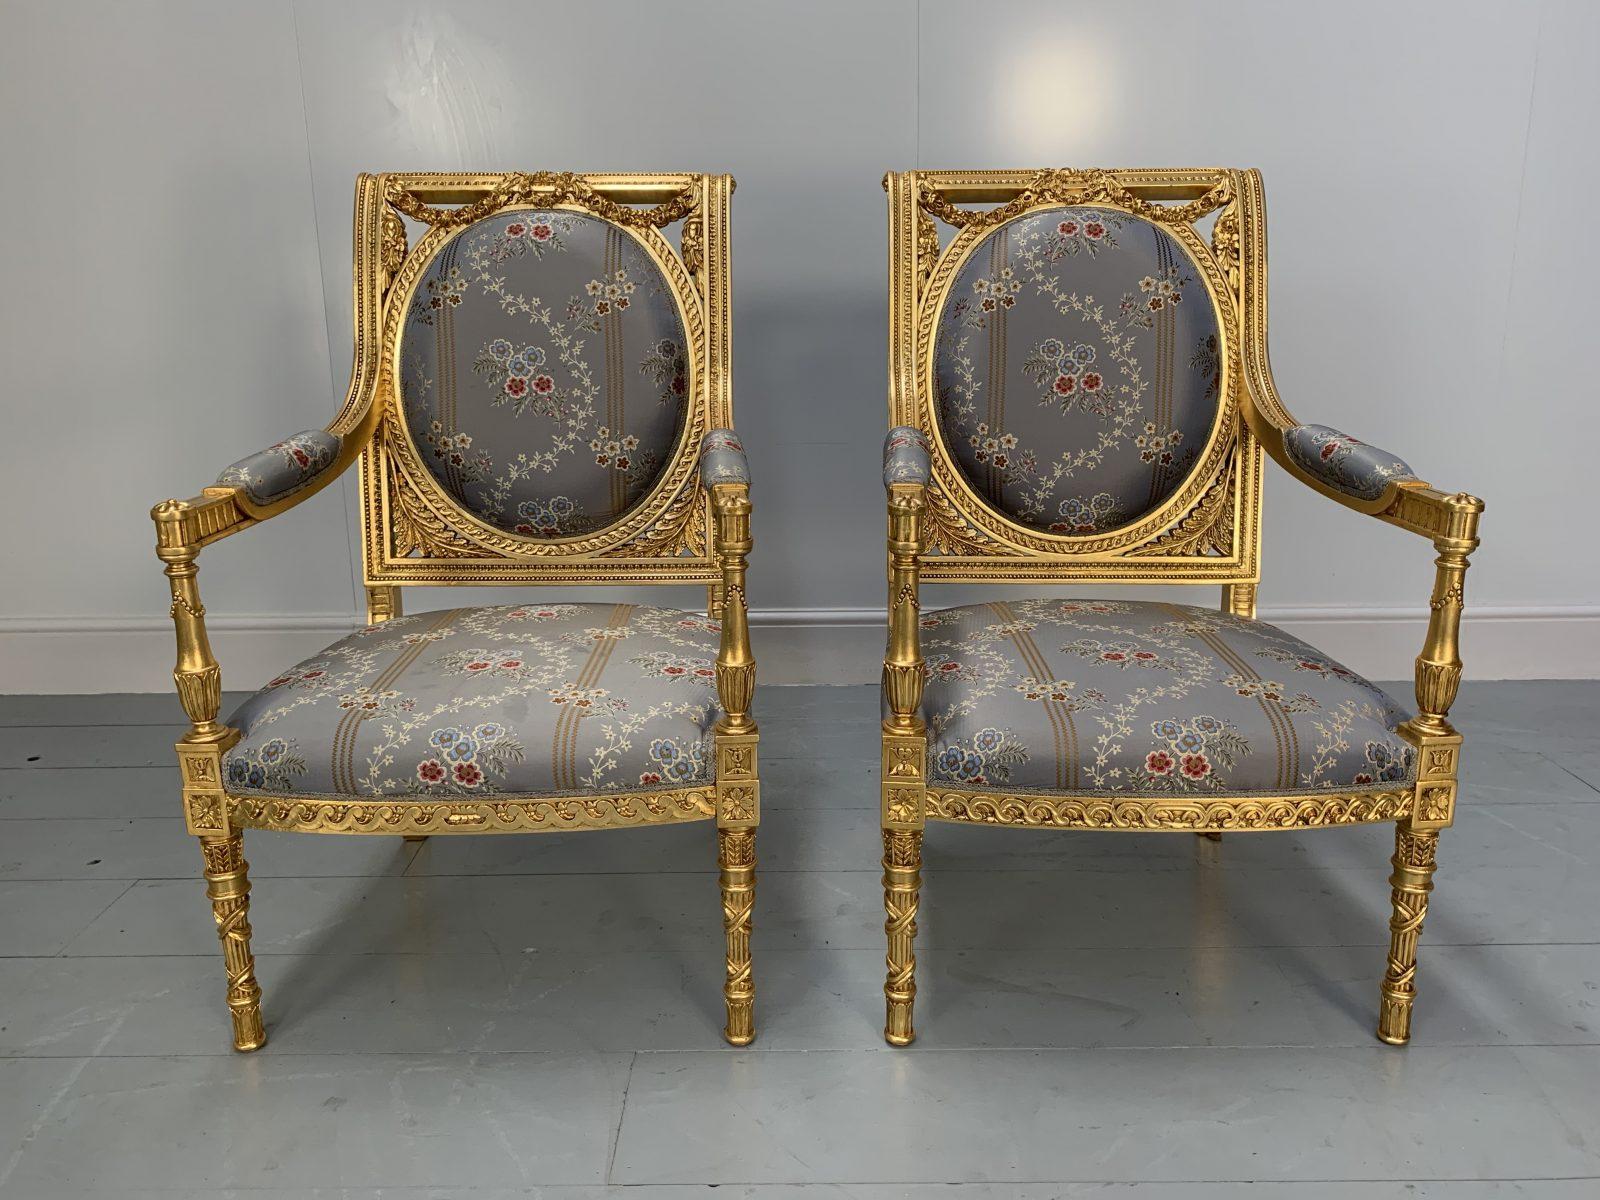 By choosing to view this listing, I can only assume you are familiar with the world-renown “Asnaghi” brand, and fully-understand the nature of what is on offer.

Asnaghi make pieces of furniture that are far more than just that. They create real